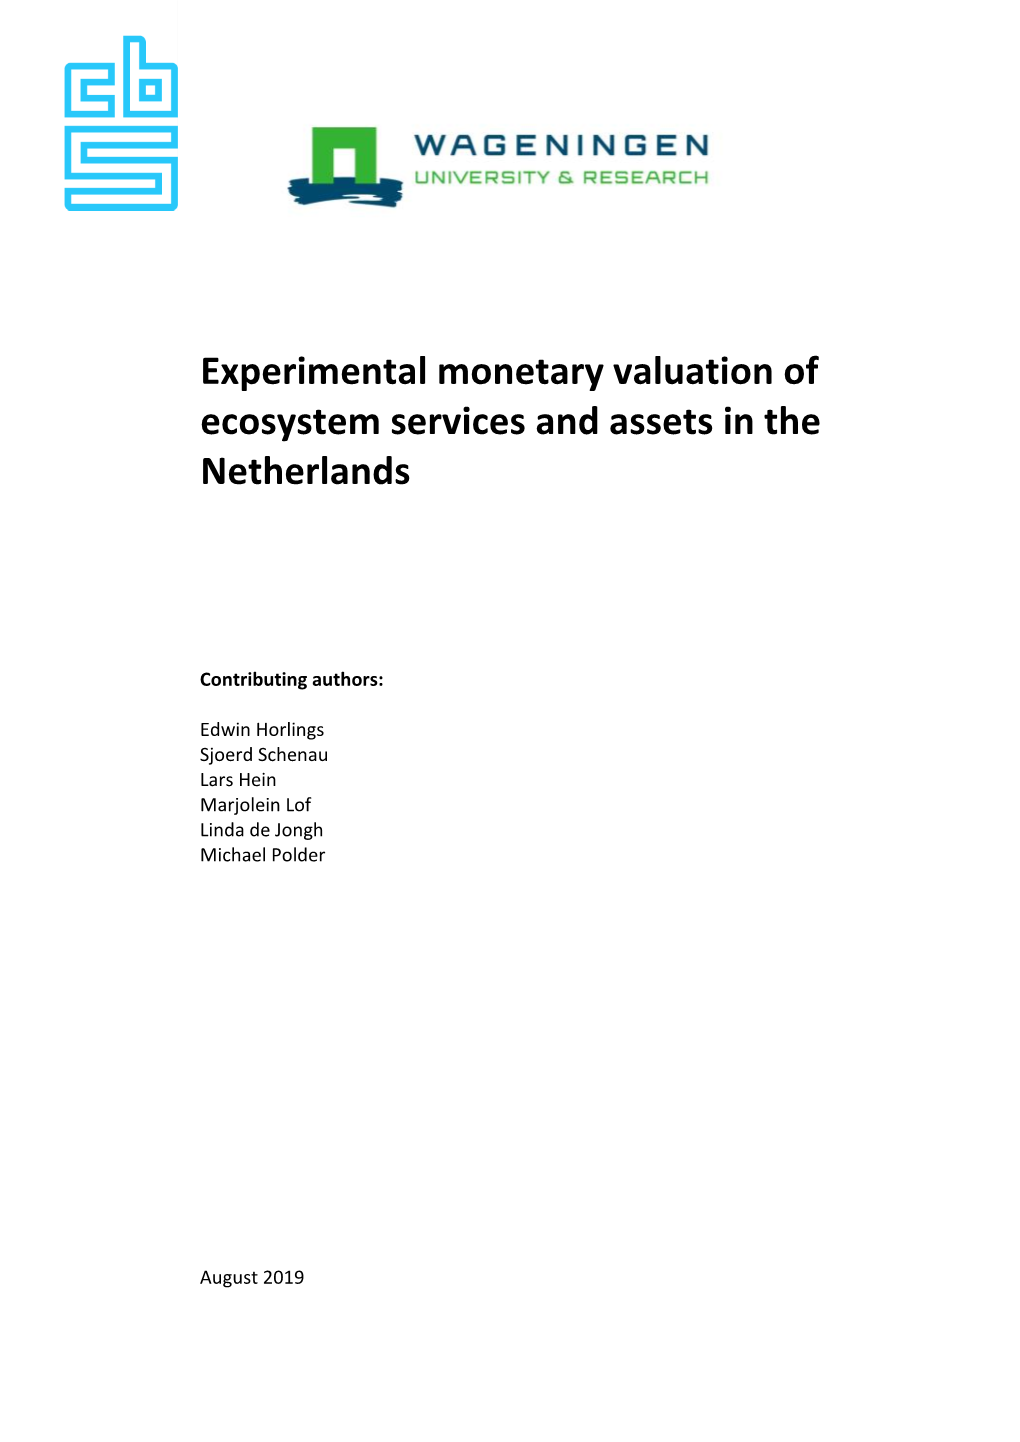 Experimental Monetary Valuation of Ecosystem Services and Assets in the Netherlands